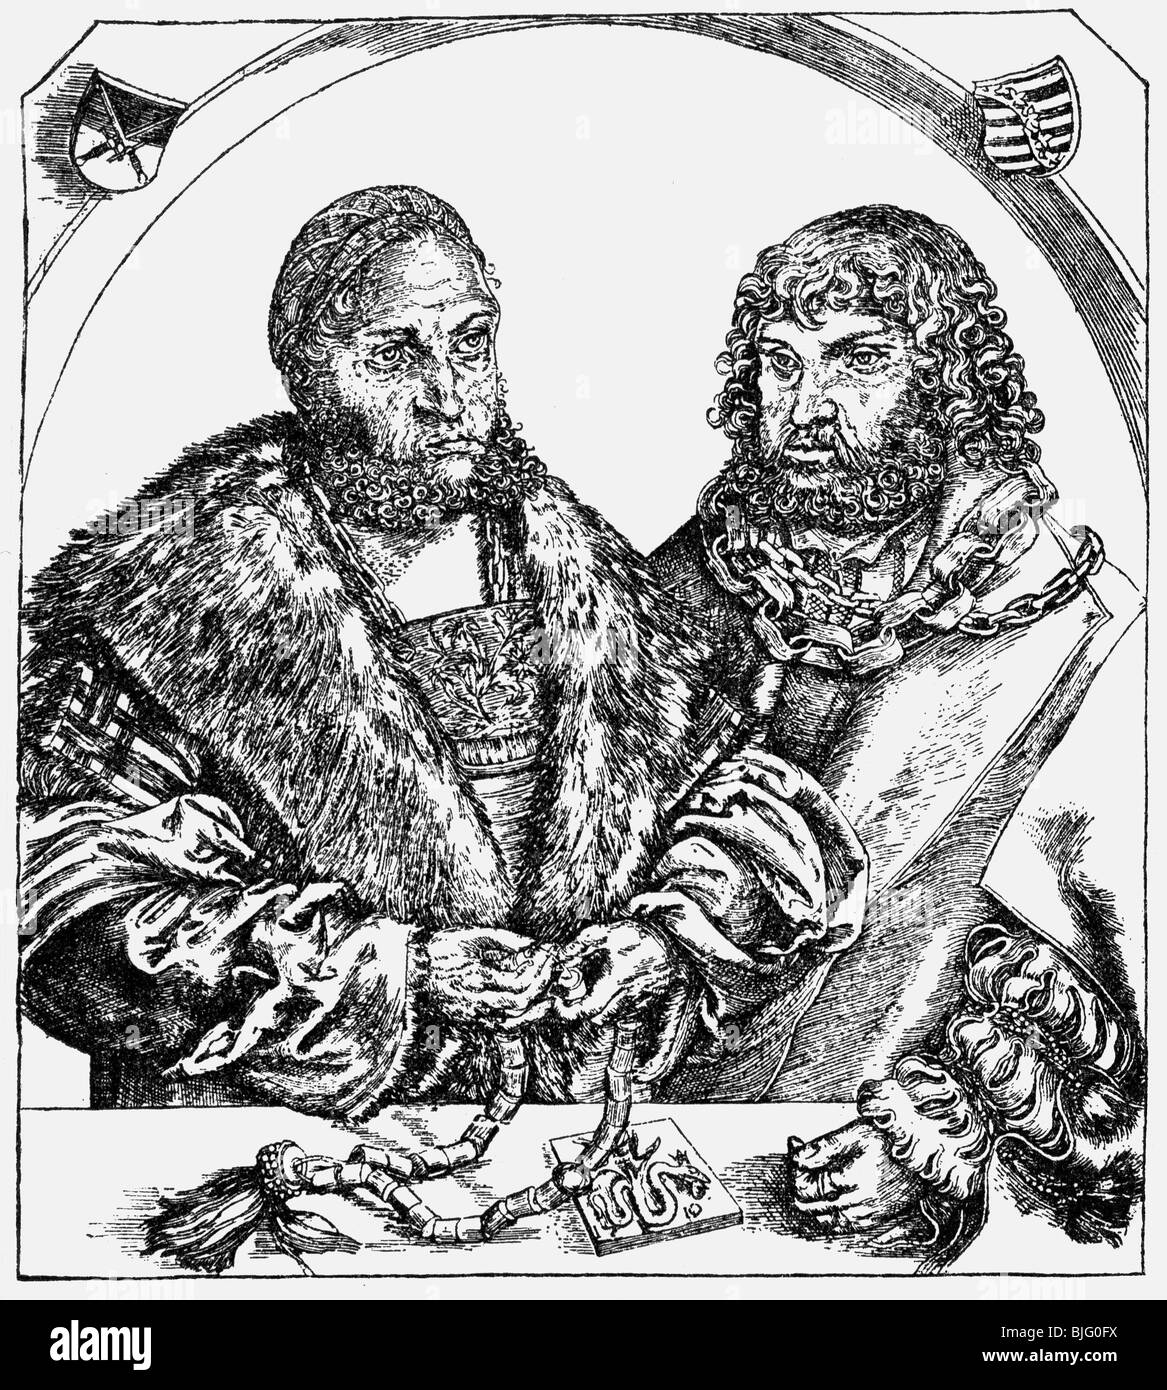 Frederick III 'the Wise', 17.1.1486 - 5.5.1525, Elector of Saxony 26.8.1486 - 5.5.1525, half length, with his brother John, woodcut by Lucas Cranach the Elder, 16th century,  , Stock Photo